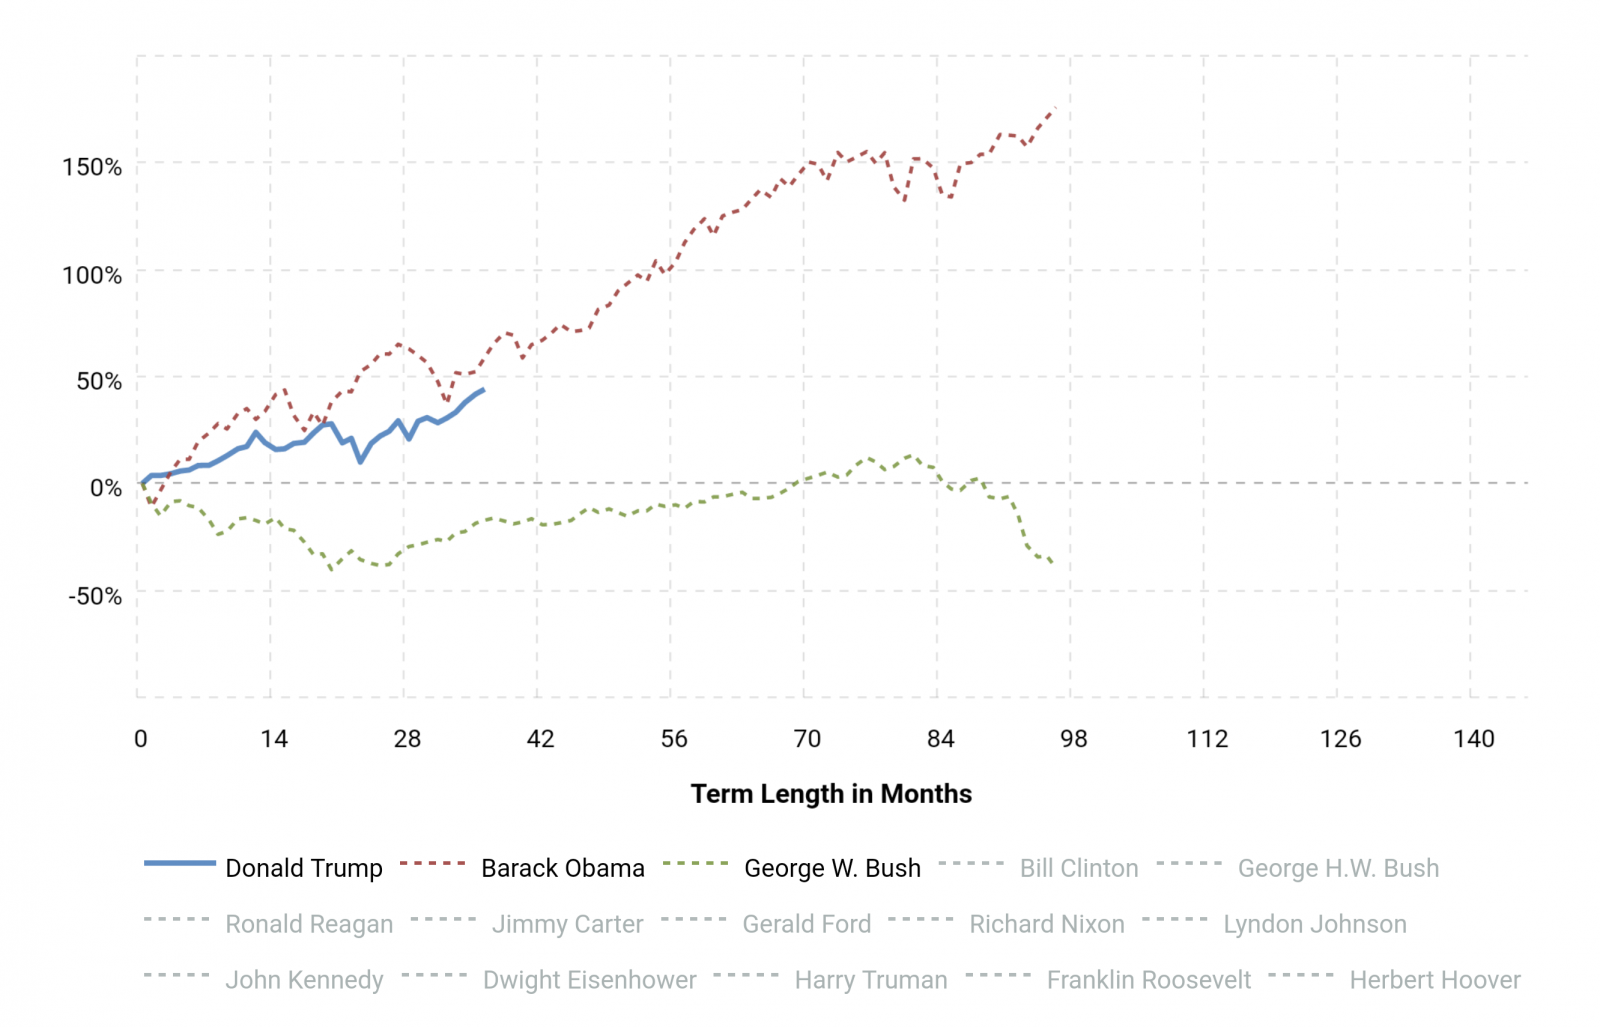 sp500-performance-by-president-2020-01-31-macrotrends.png